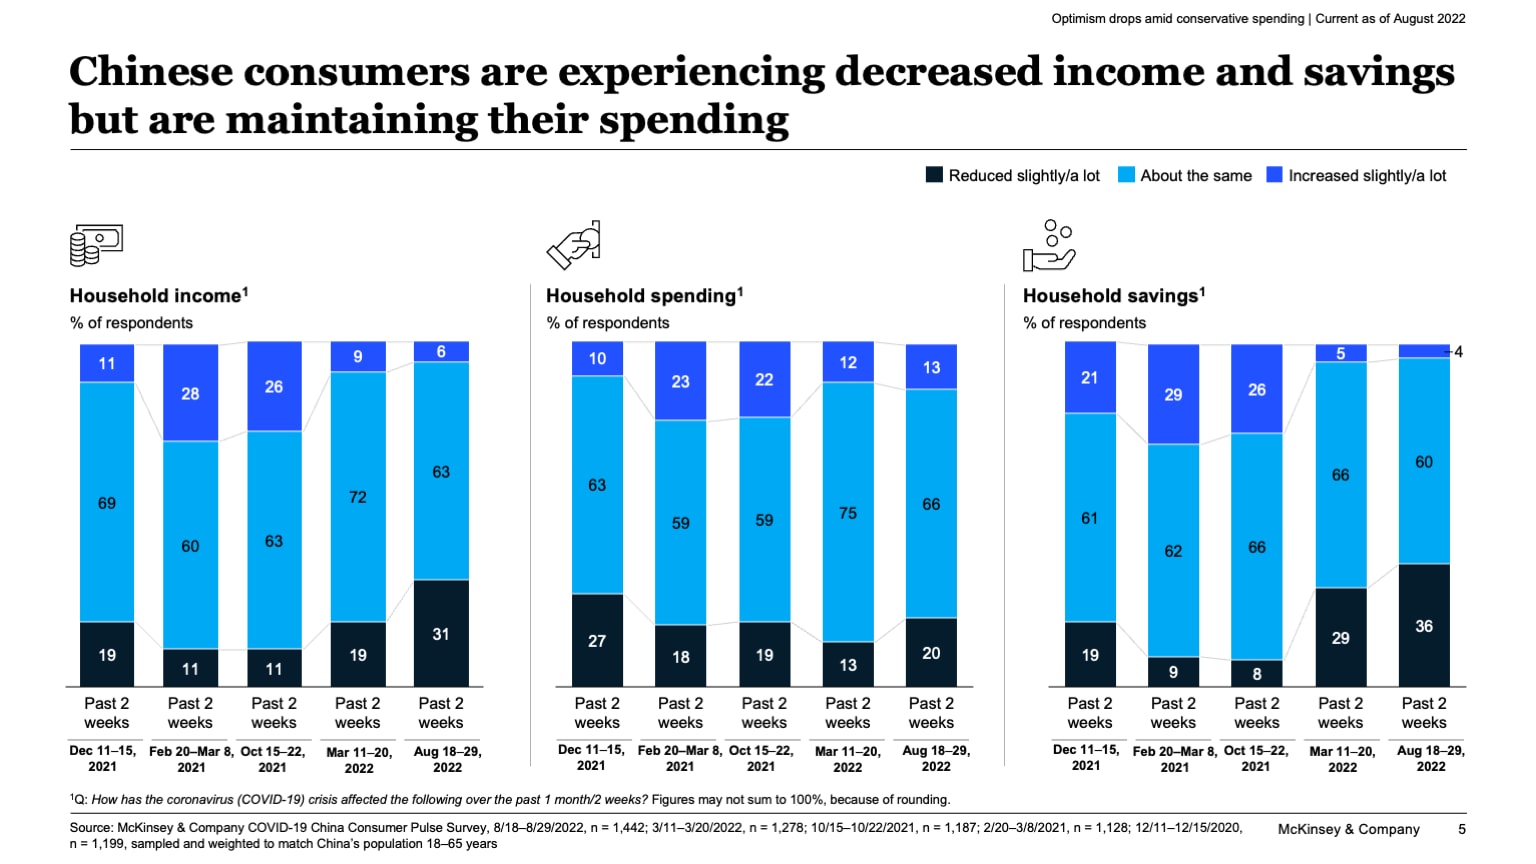 Chinese consumers are experiencing decreased income and savings but are maintaining their spending